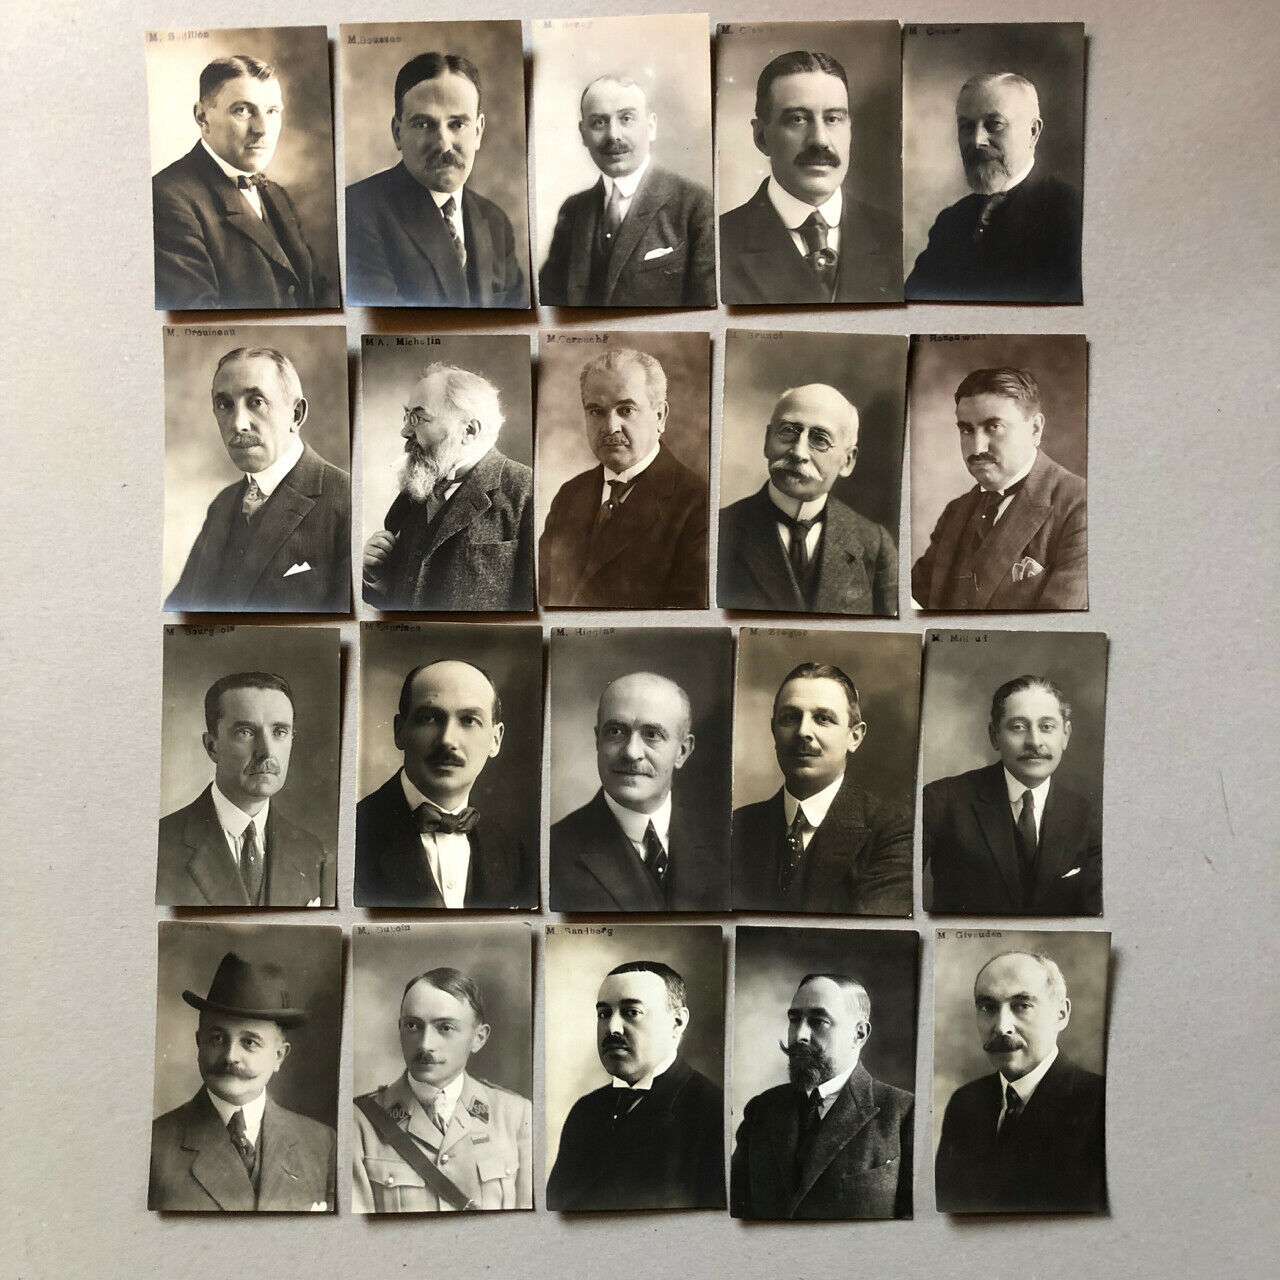 58 photographs cards of identified business leaders (Michelin,…) — c.1920.